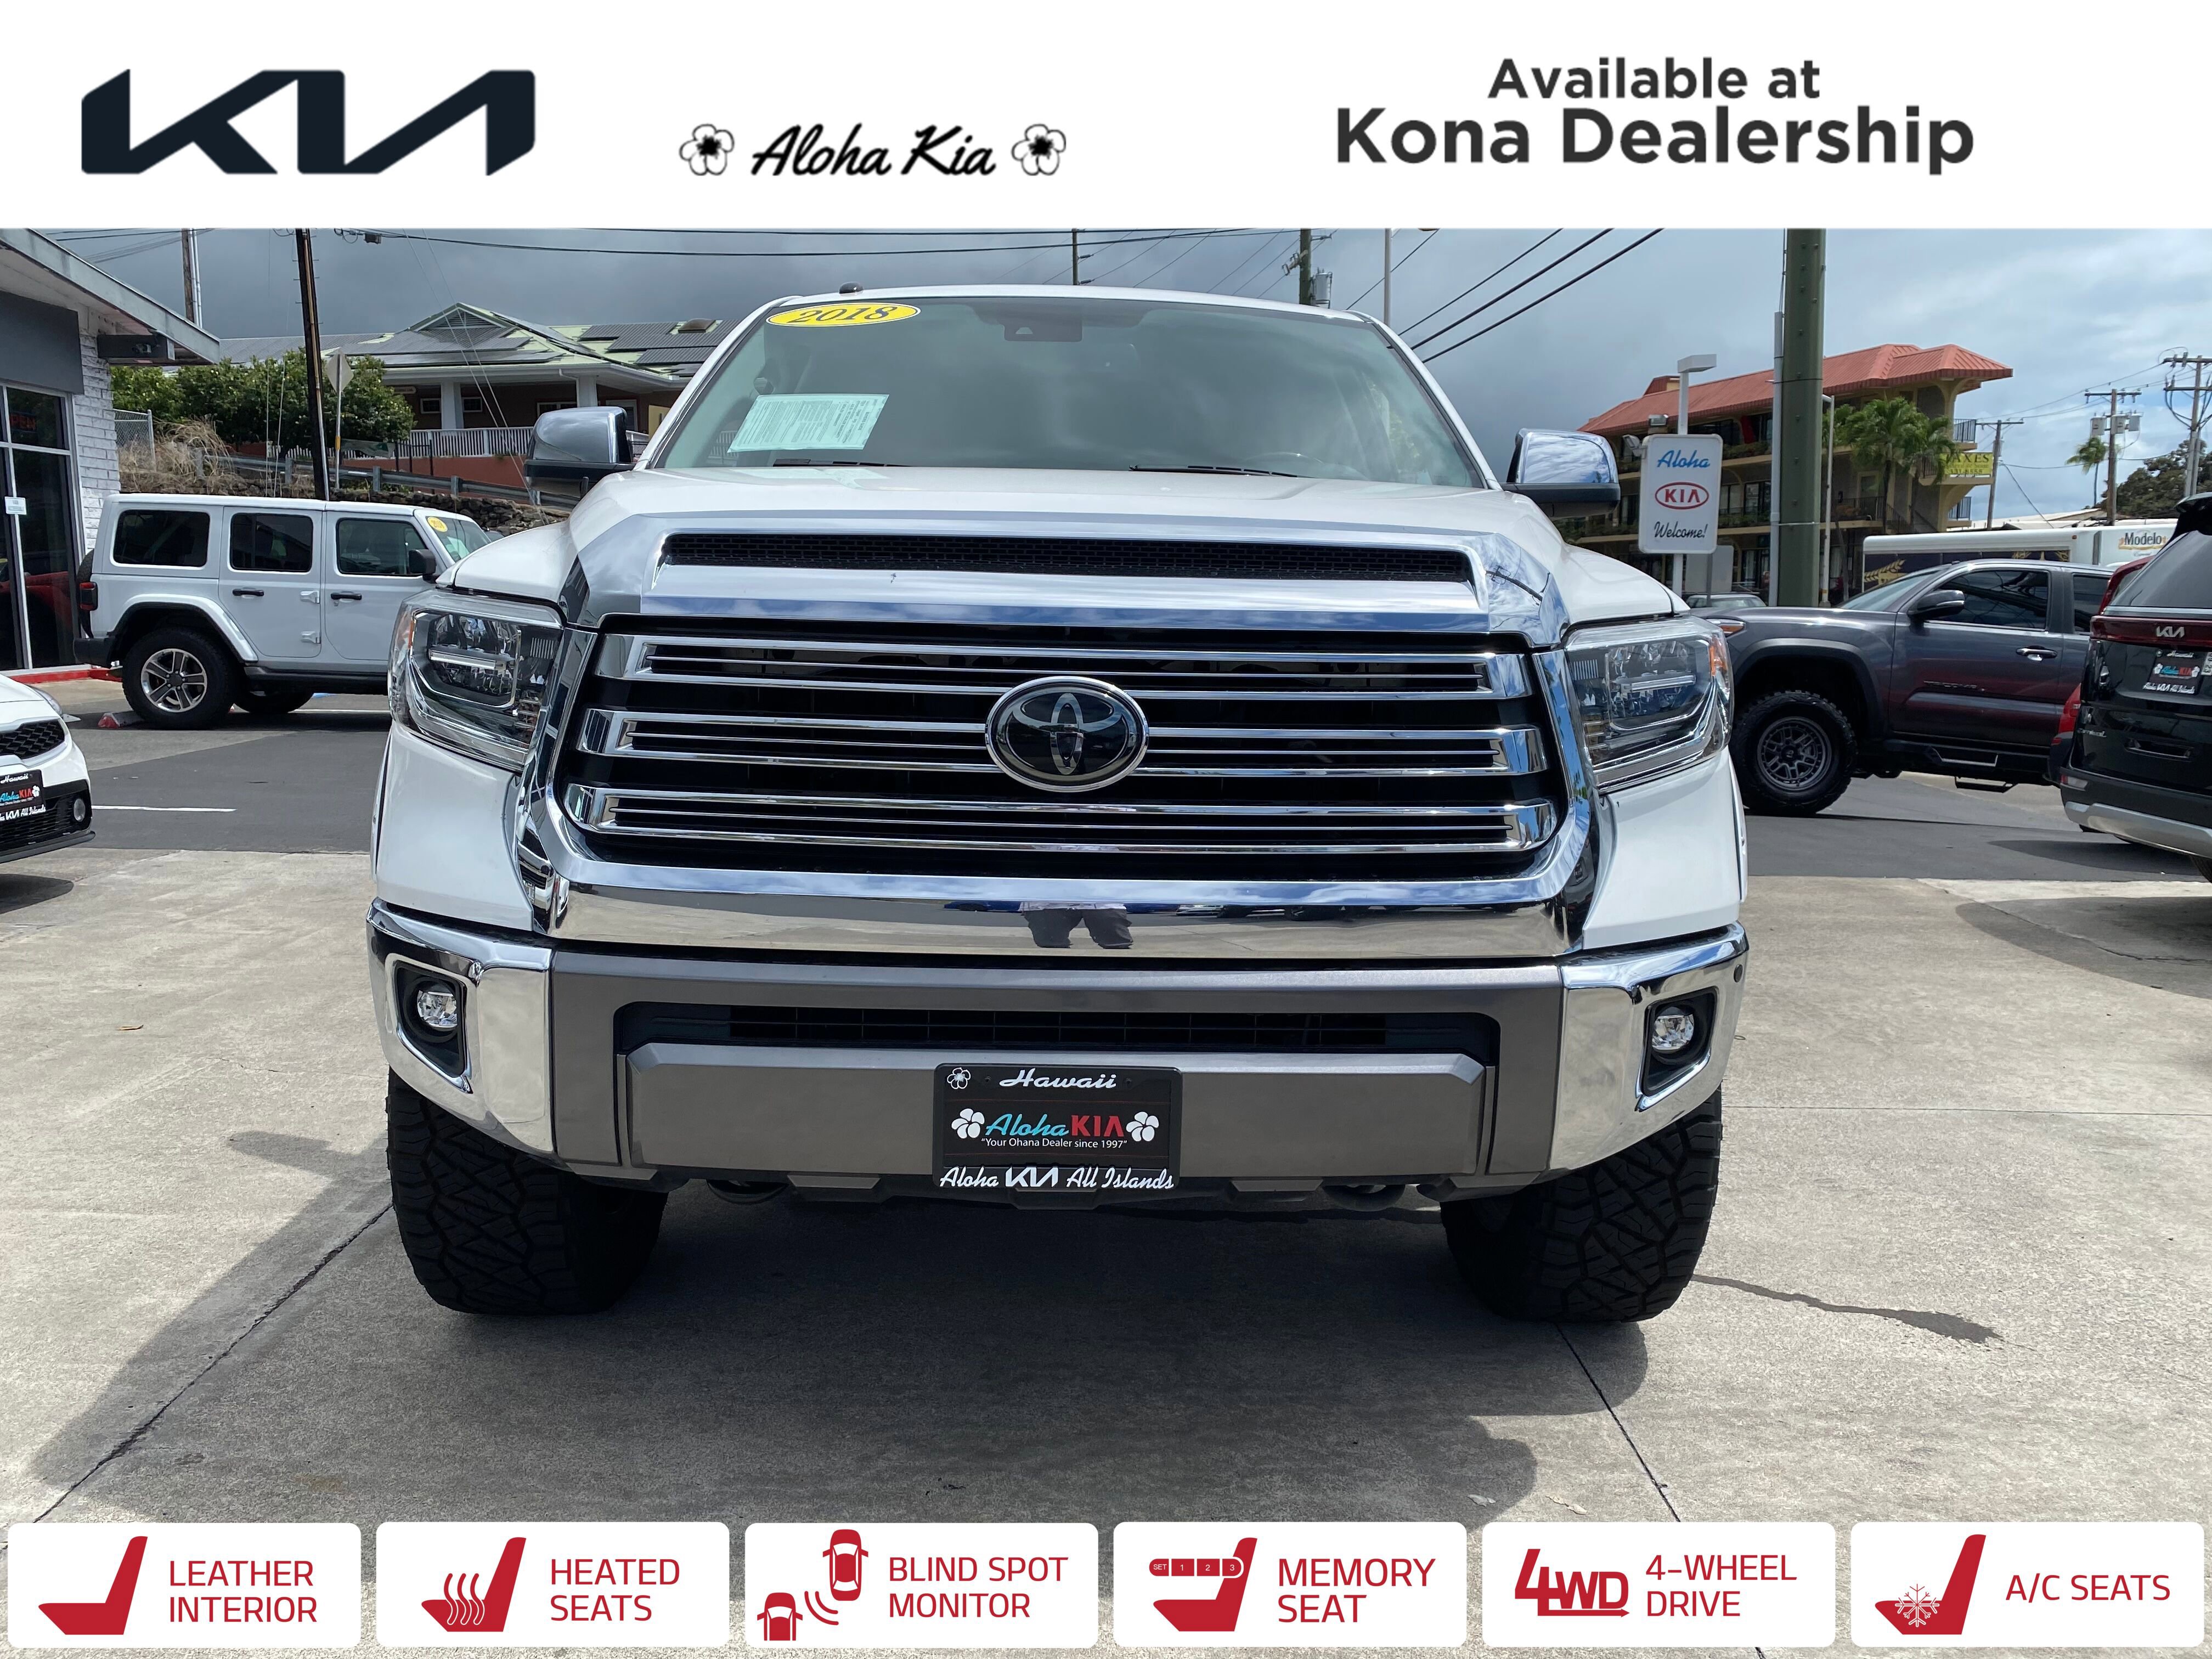 Used Trucks For Sale Right Now In Kailua Kona Hi - Autotrader